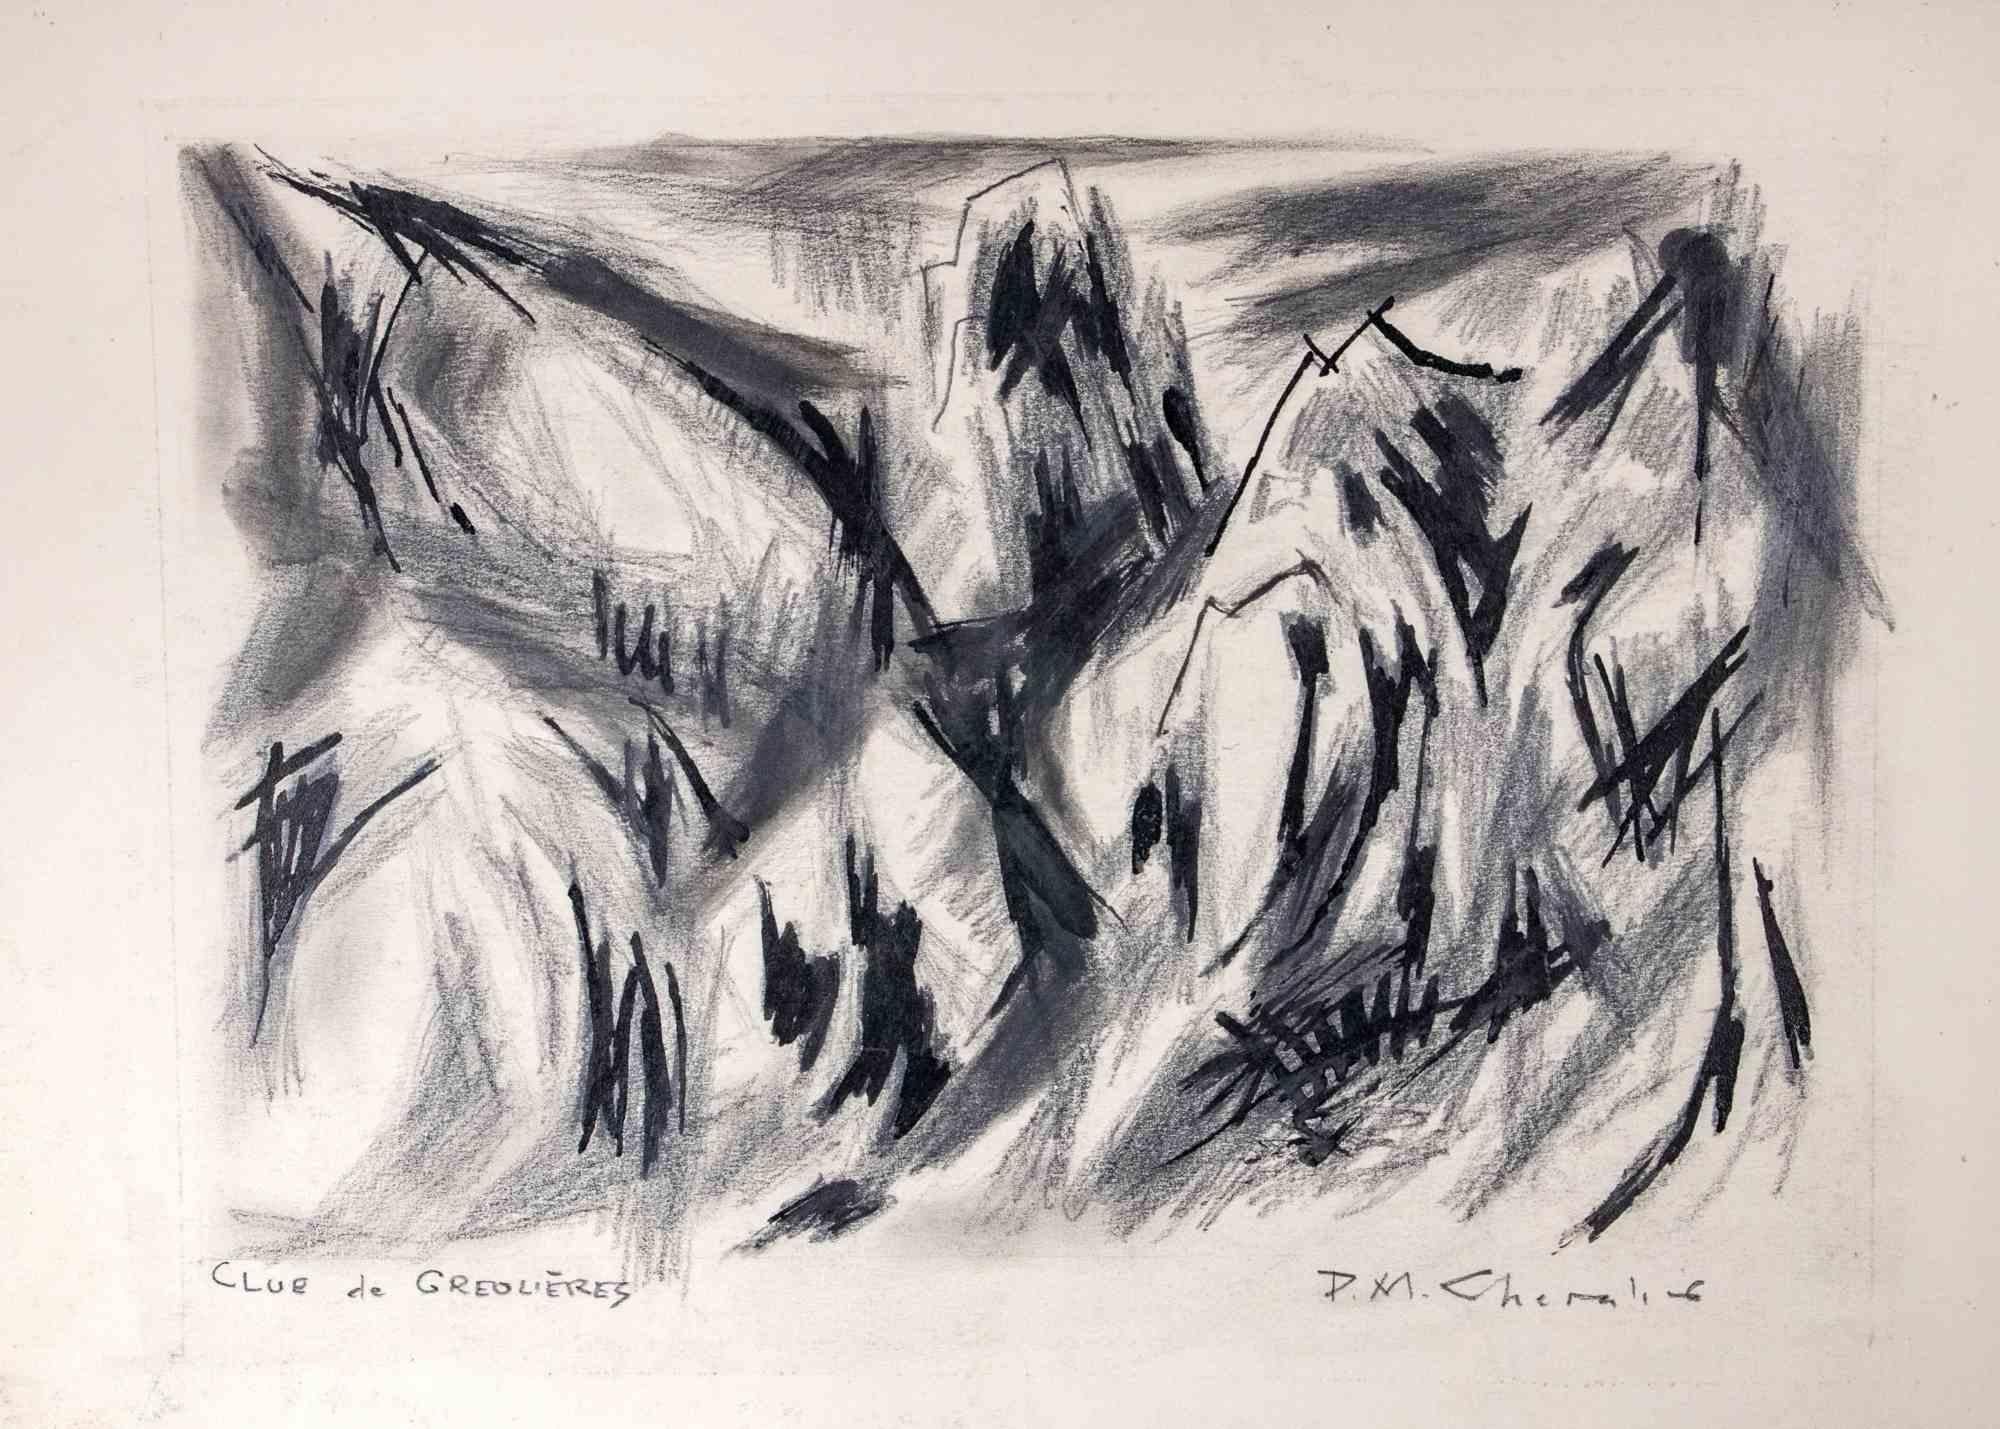 Mountains is a drawing on paper realized in the mid-20th Century by Paul-Maurice Chevalier. (1898-1984).

Ink, Charcoal, and Watercolor on paper.

Hand-signed on the lower.

Good condition.